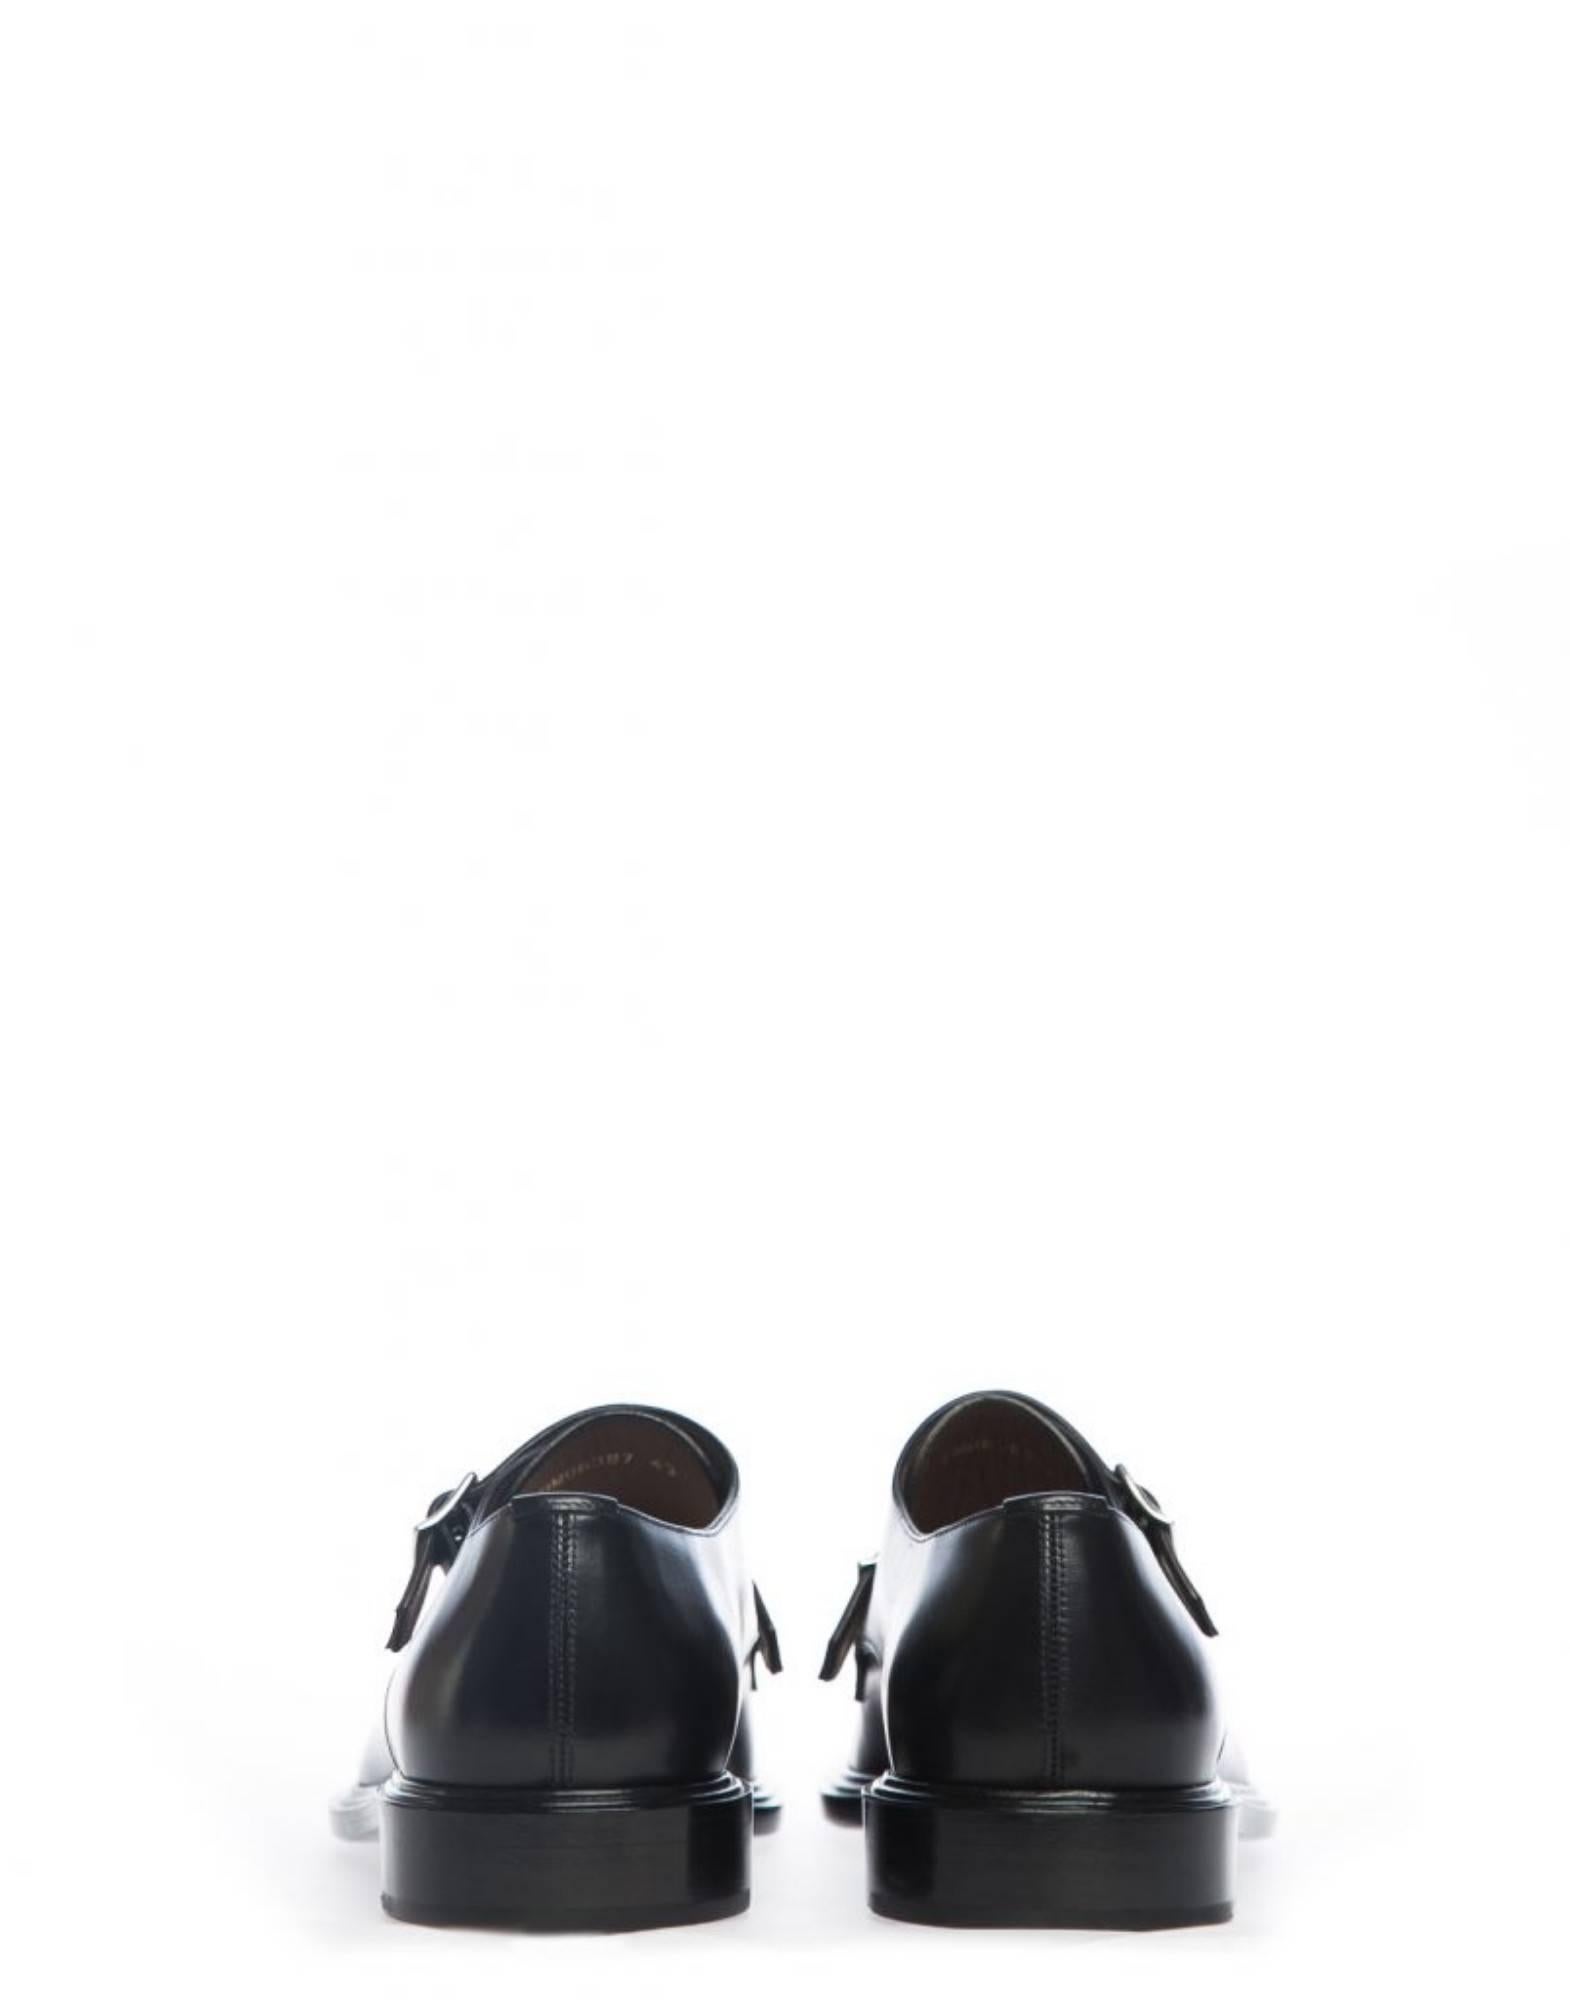 Black Givenchy Double Buckle Monk Strap Shoes (Size - 42) For Sale